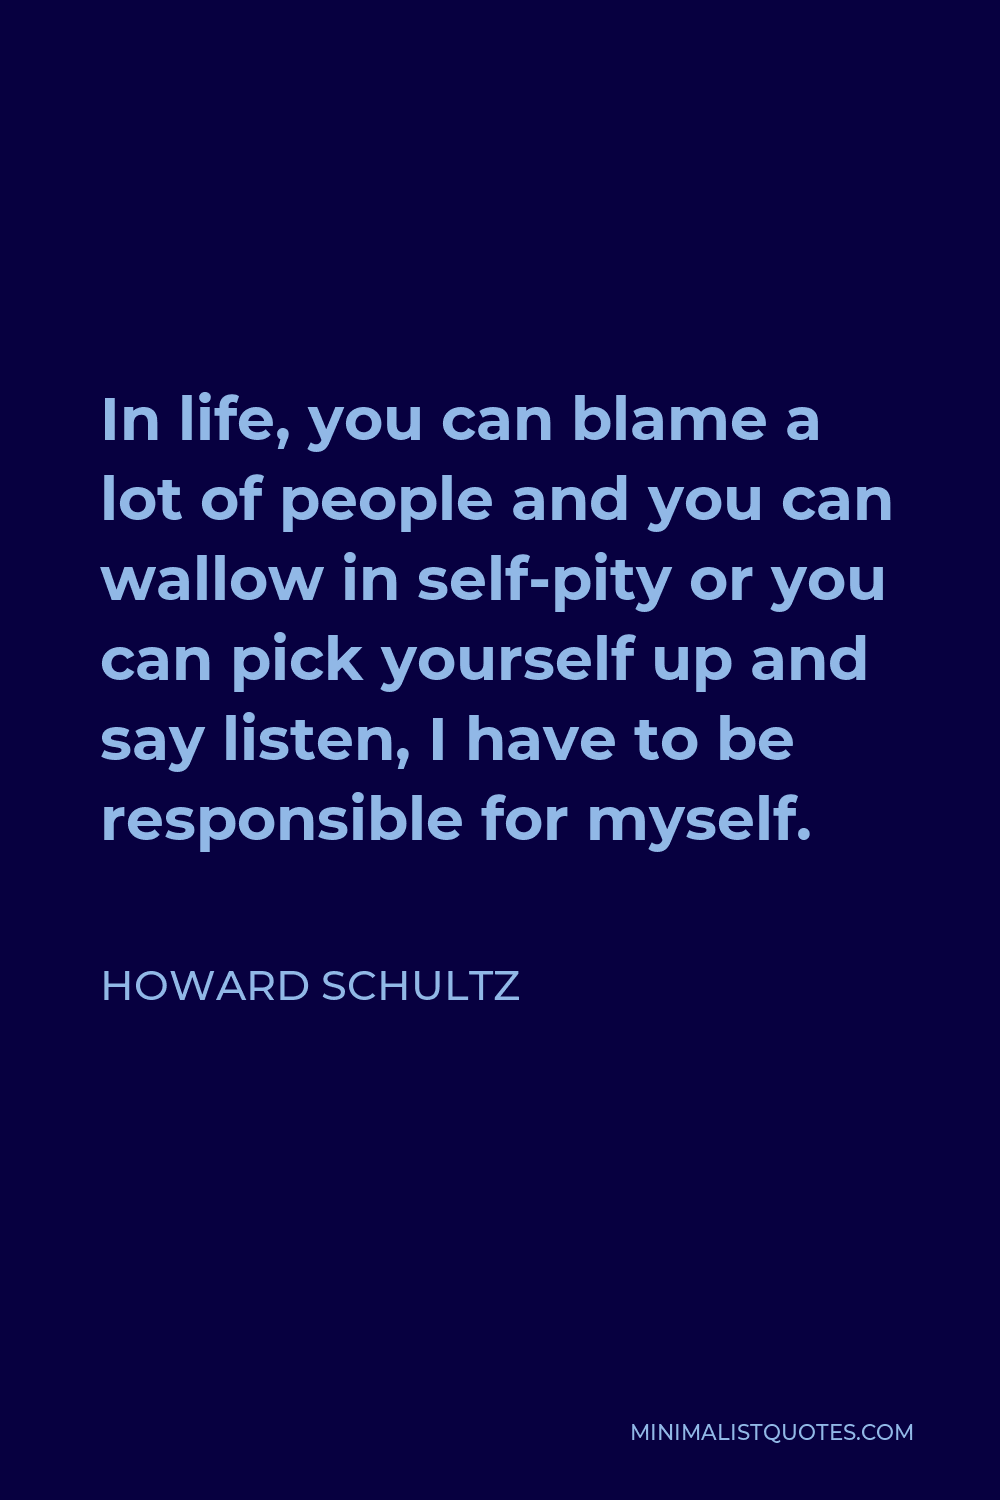 Howard Schultz Quote - In life, you can blame a lot of people and you can wallow in self-pity or you can pick yourself up and say listen, I have to be responsible for myself.